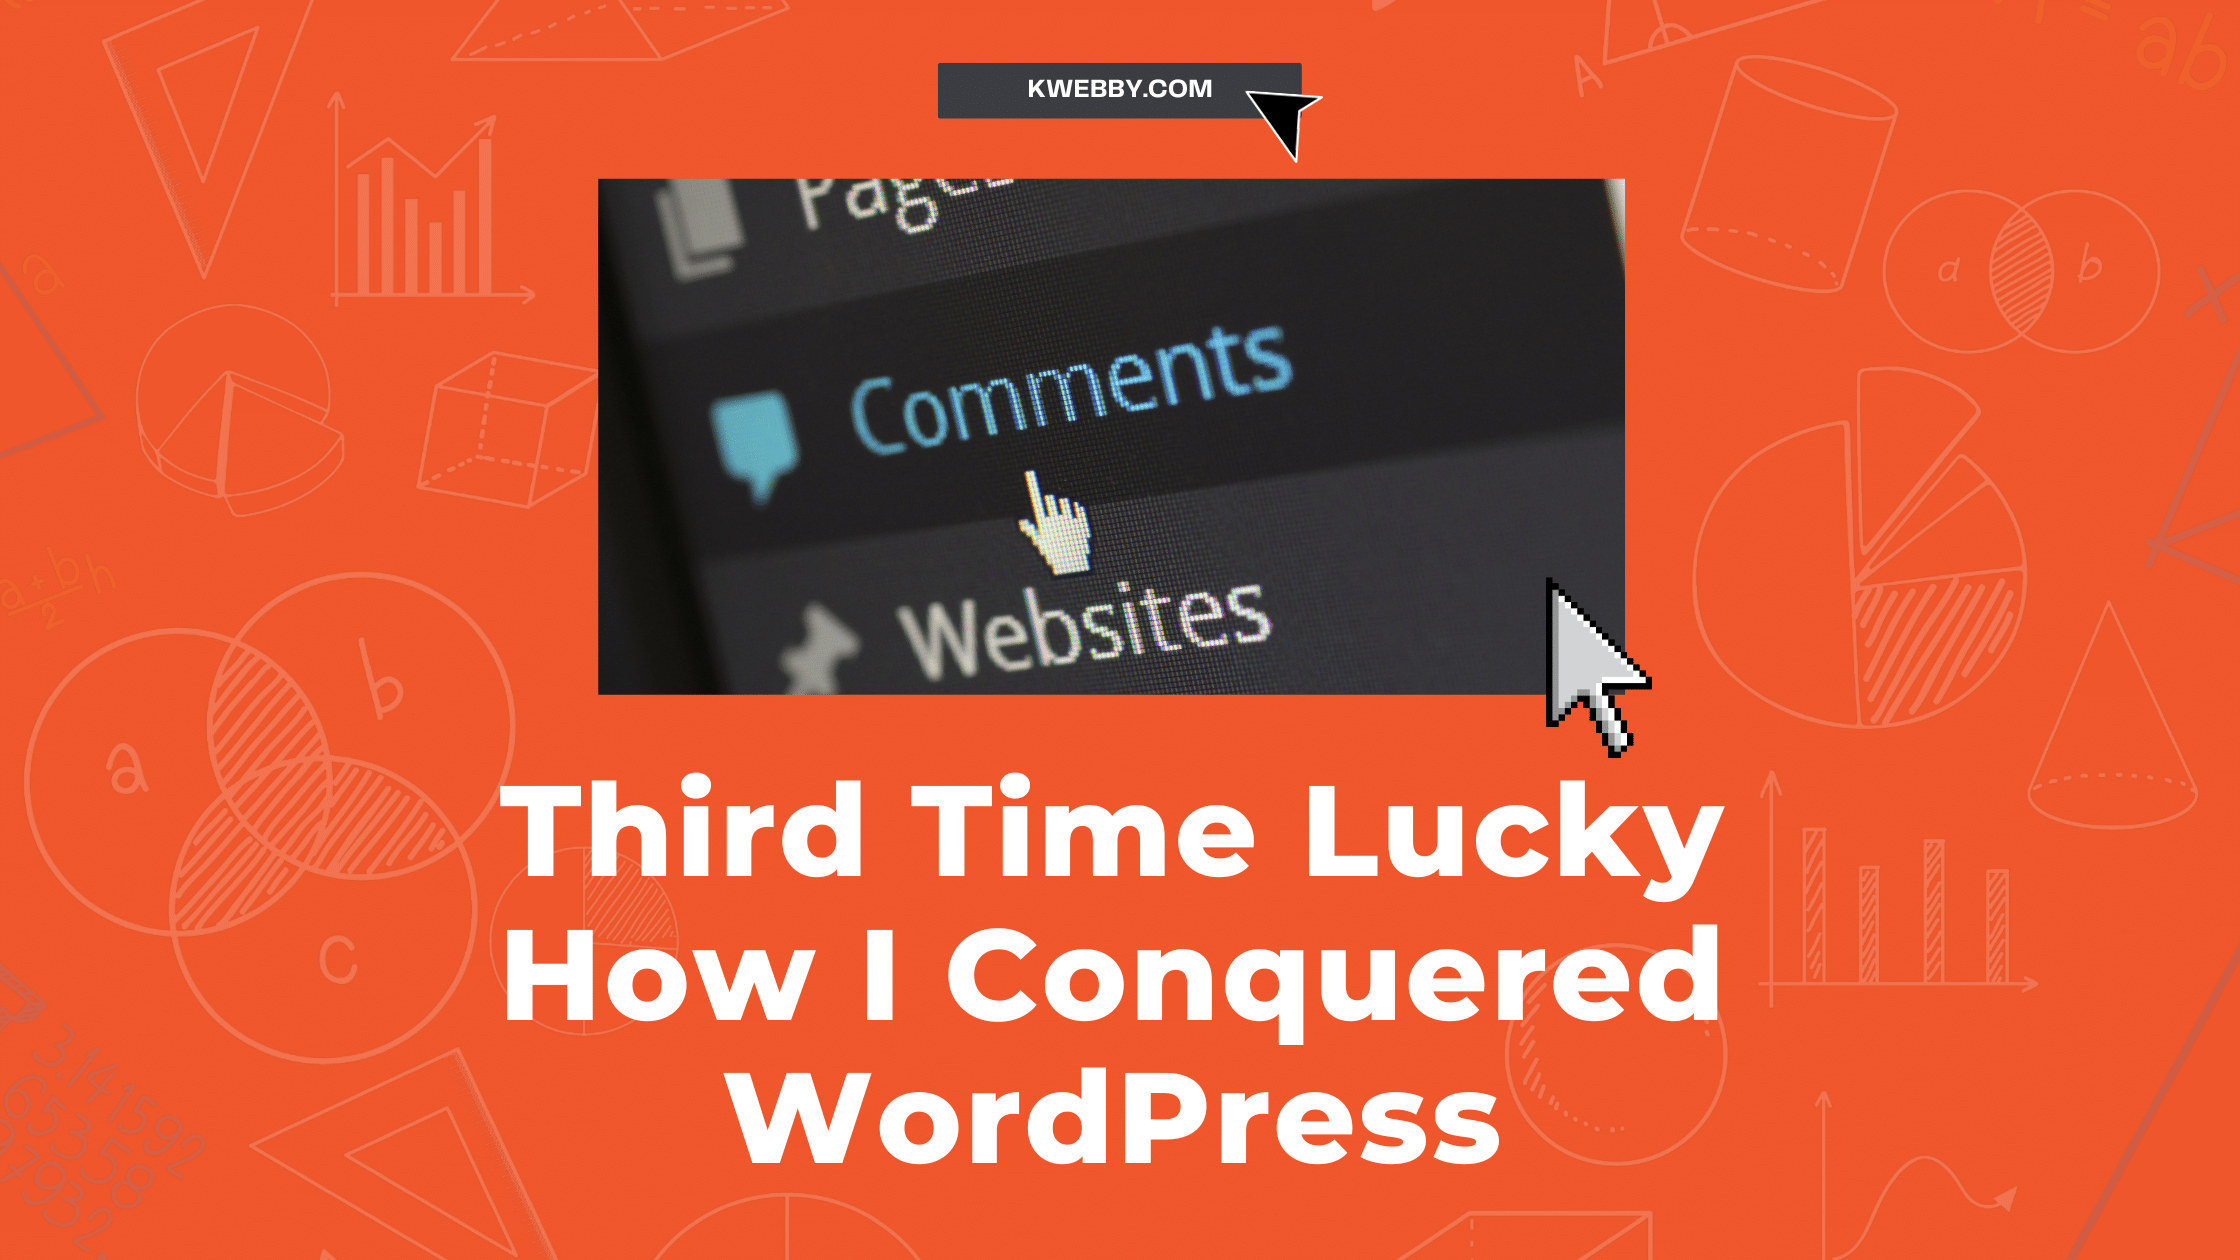 Third Time Lucky How I Conquered WordPress (12 Tips & Tricks)